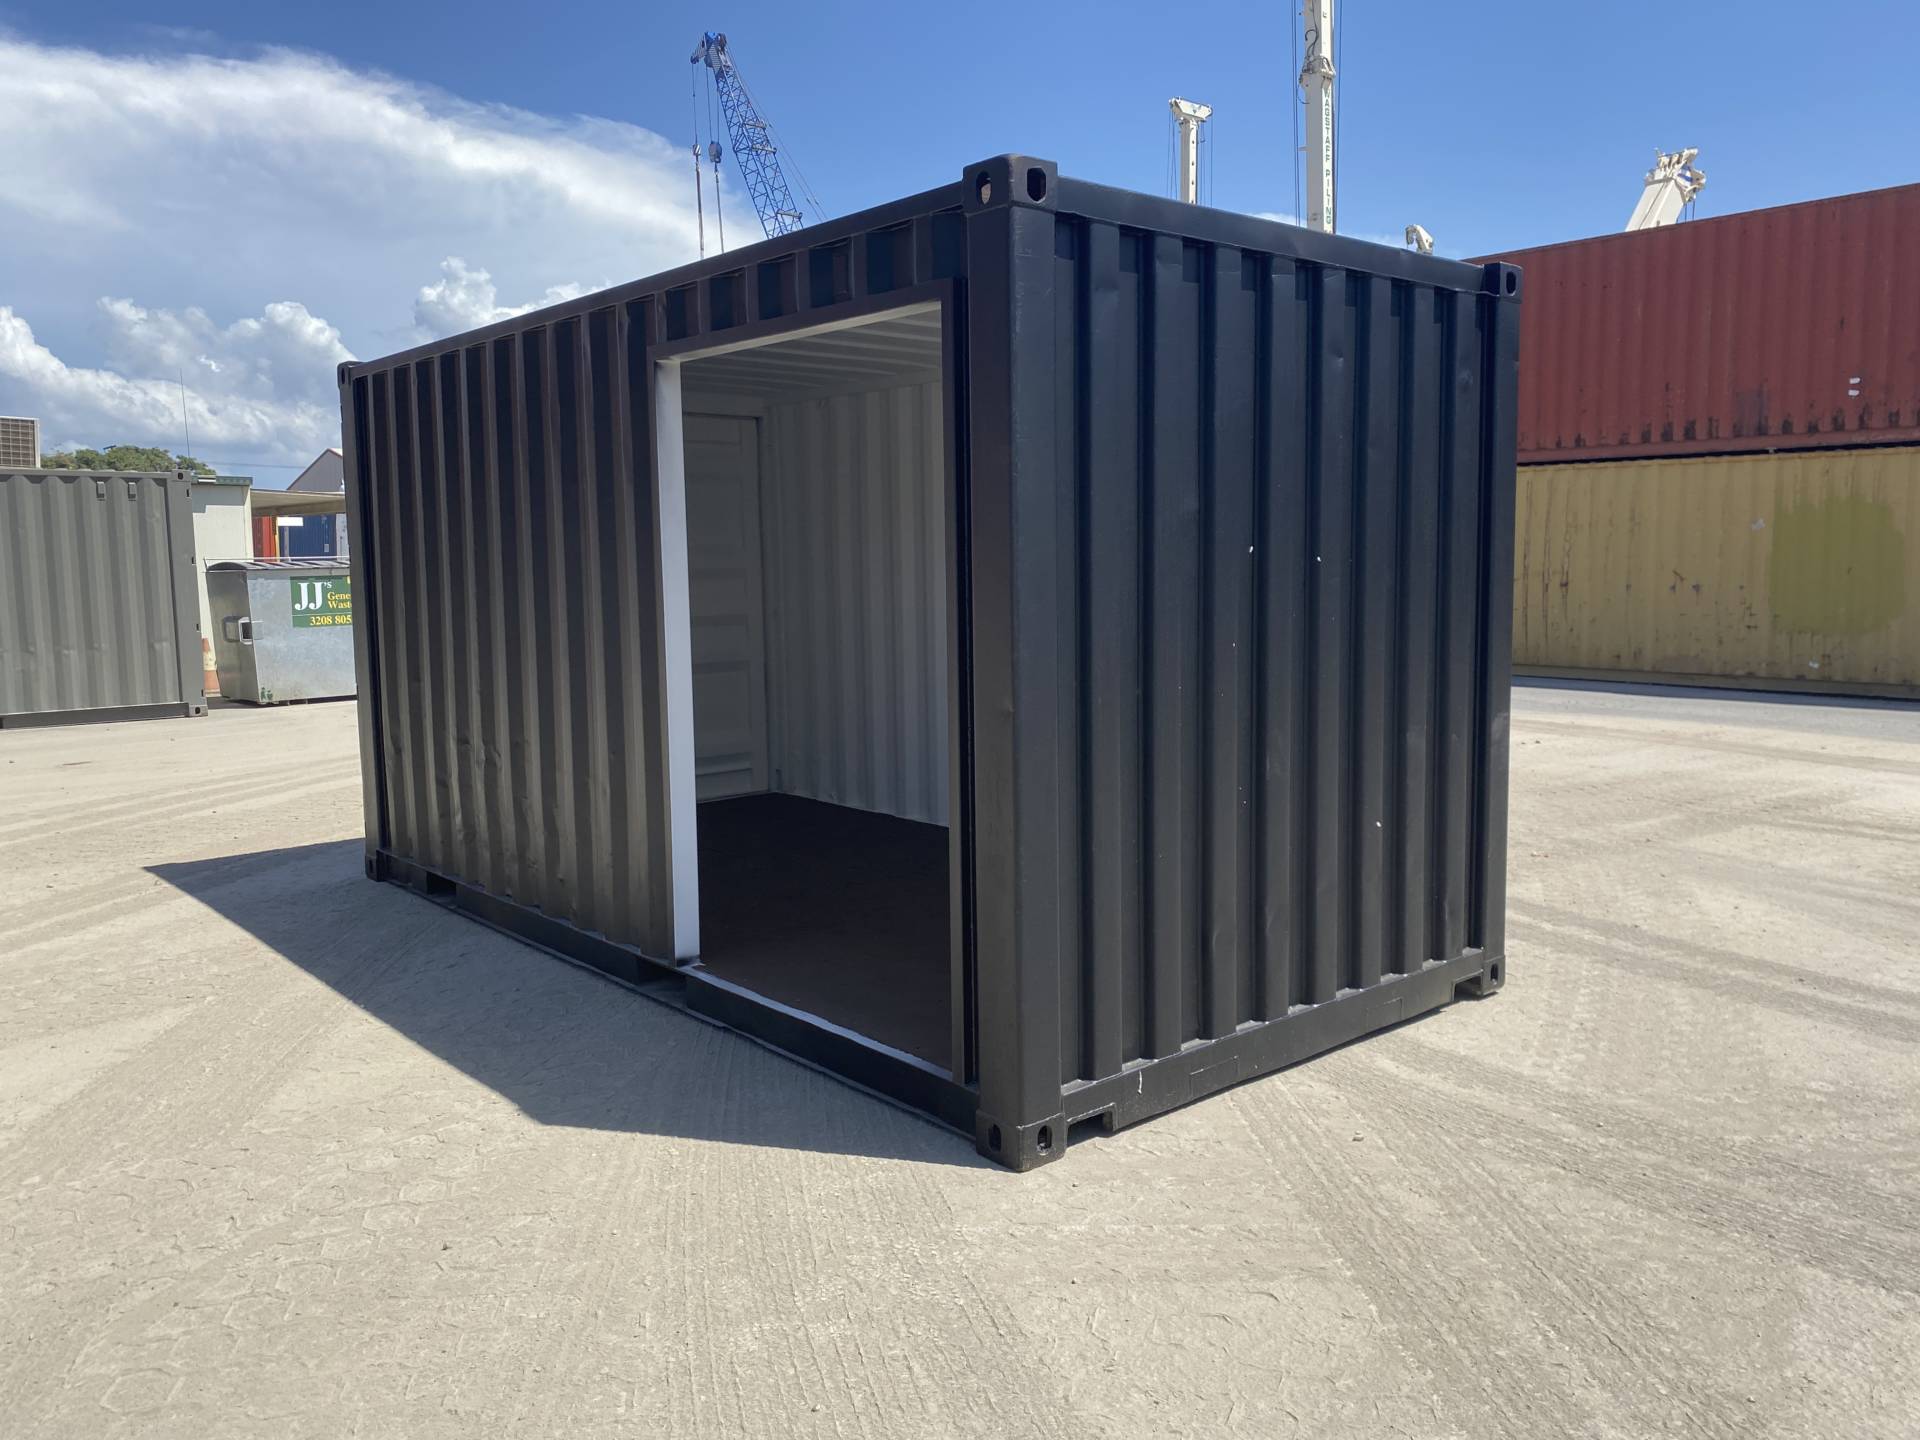 are shipping containers hot?